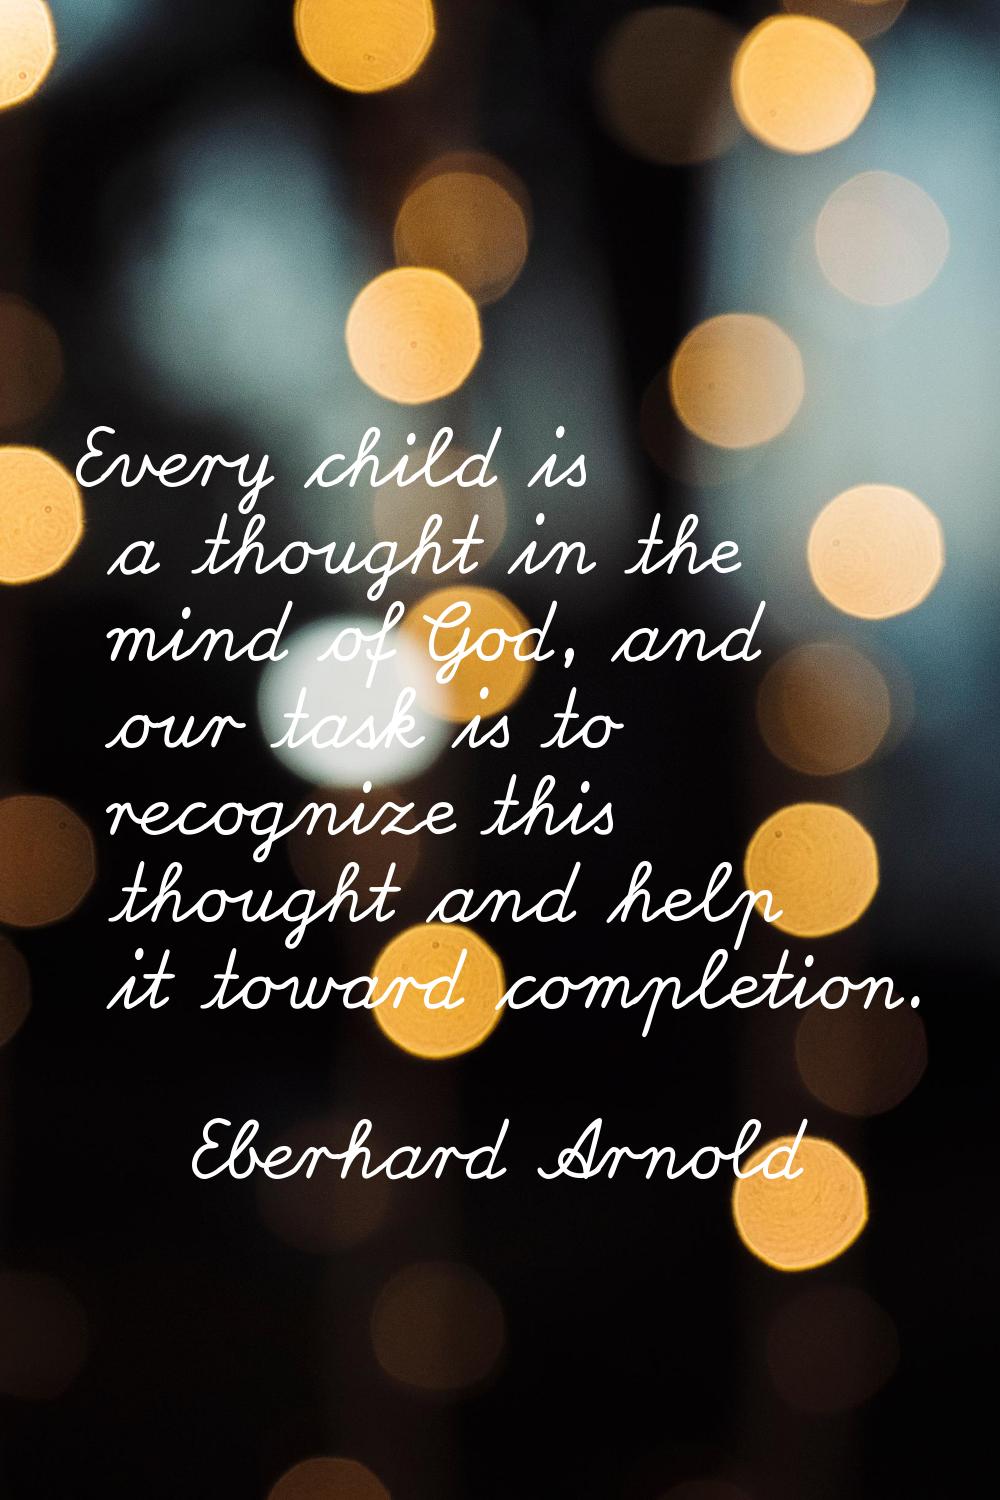 Every child is a thought in the mind of God, and our task is to recognize this thought and help it 